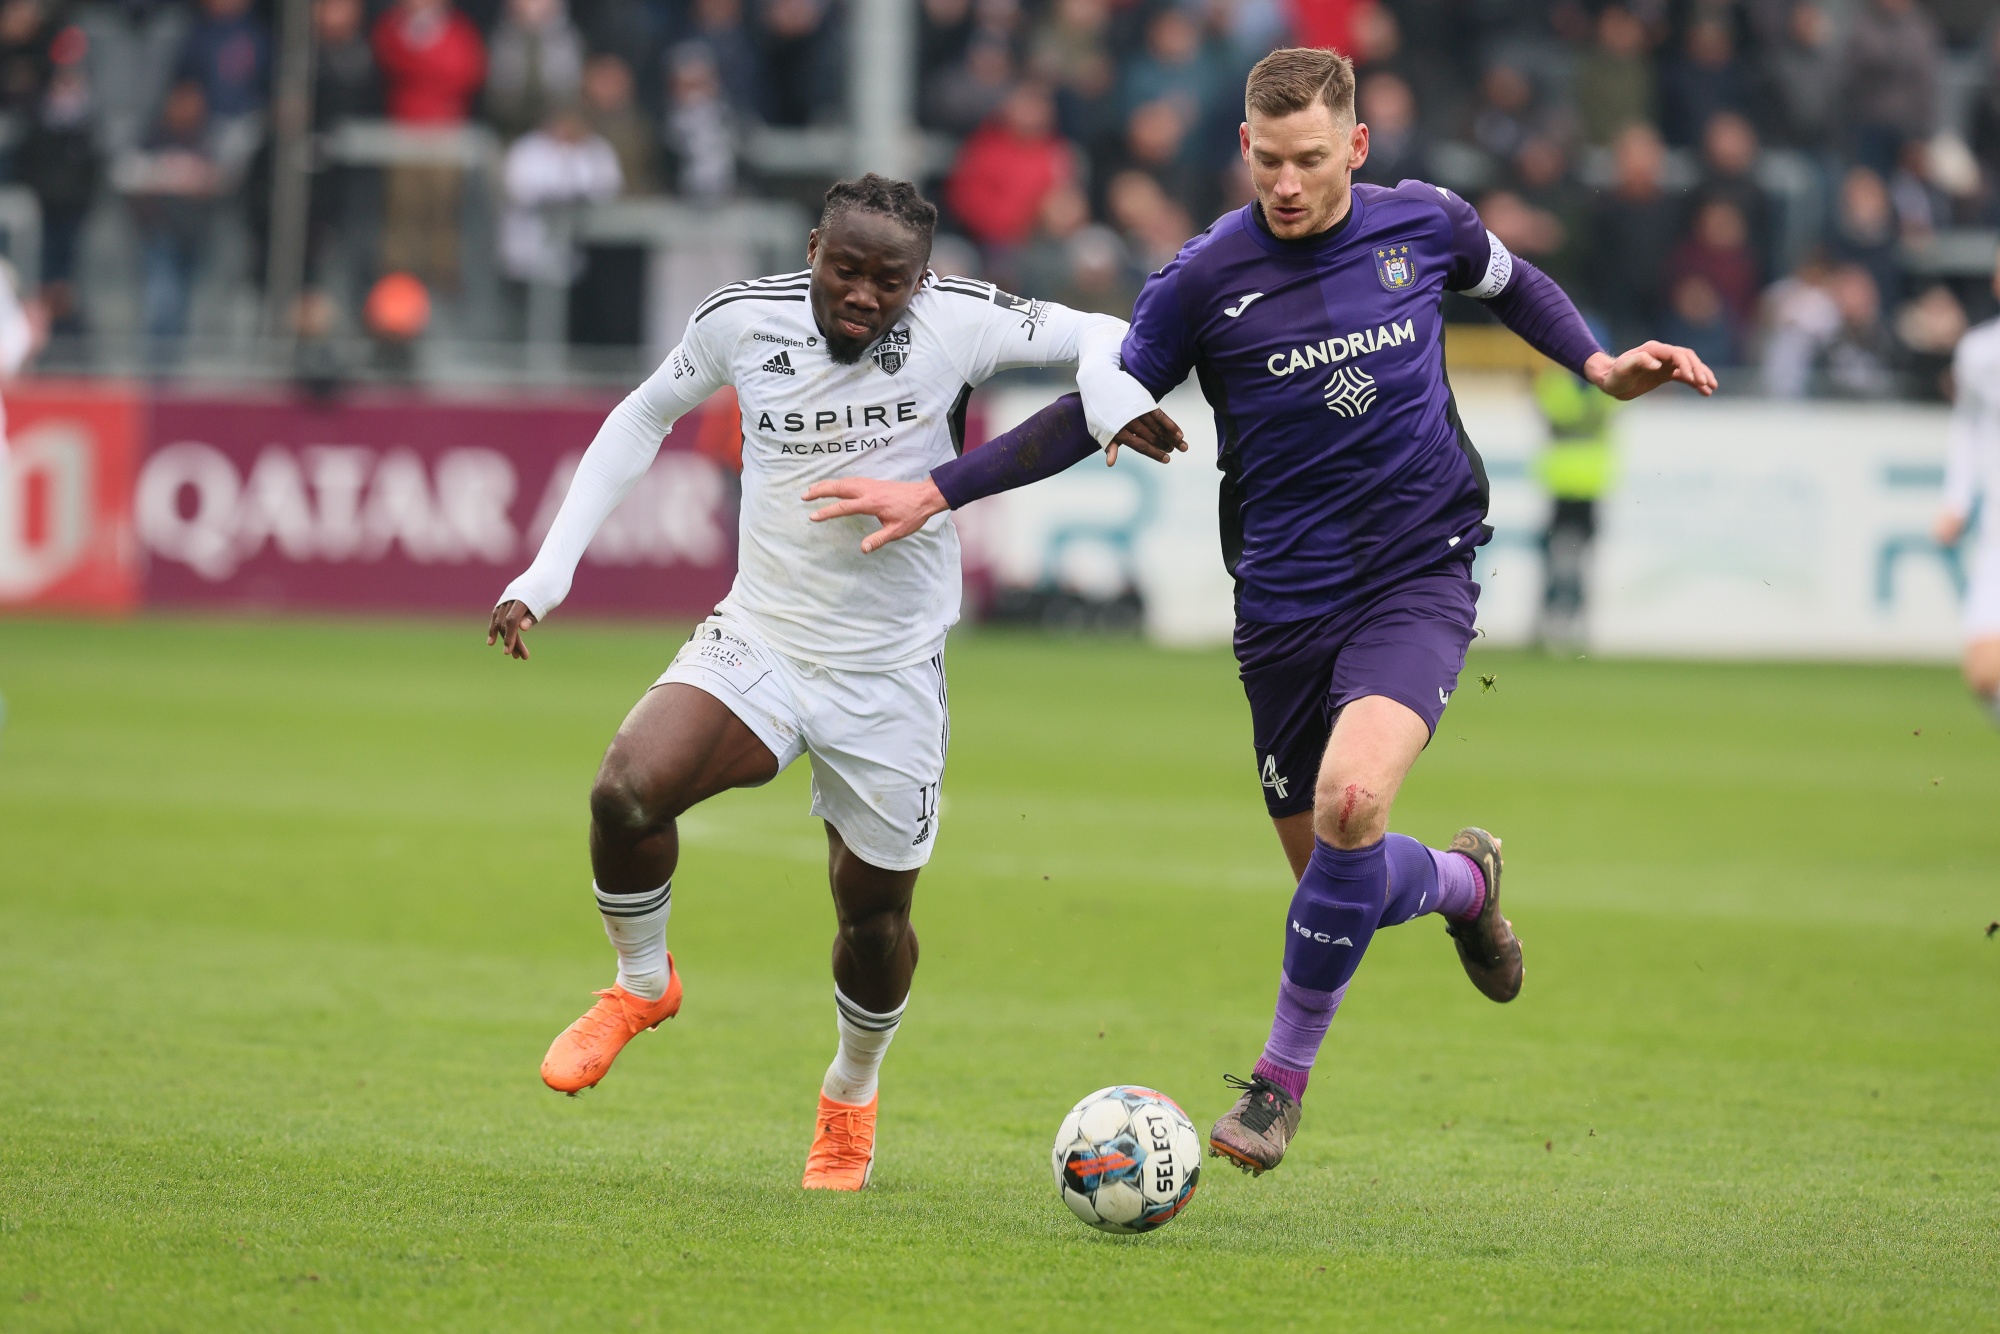 Eupen's Konan Ignace N'Dri and Anderlecht's Jan Vertonghen fight for the ball during a soccer match between KAS Eupen and RSC Anderlecht, Sunday 02 April 2023 in Eupen, on day 31 of the 2022-2023 'Jupiler Pro League' first division of the Belgian championship. BELGA PHOTO BRUNO FAHY